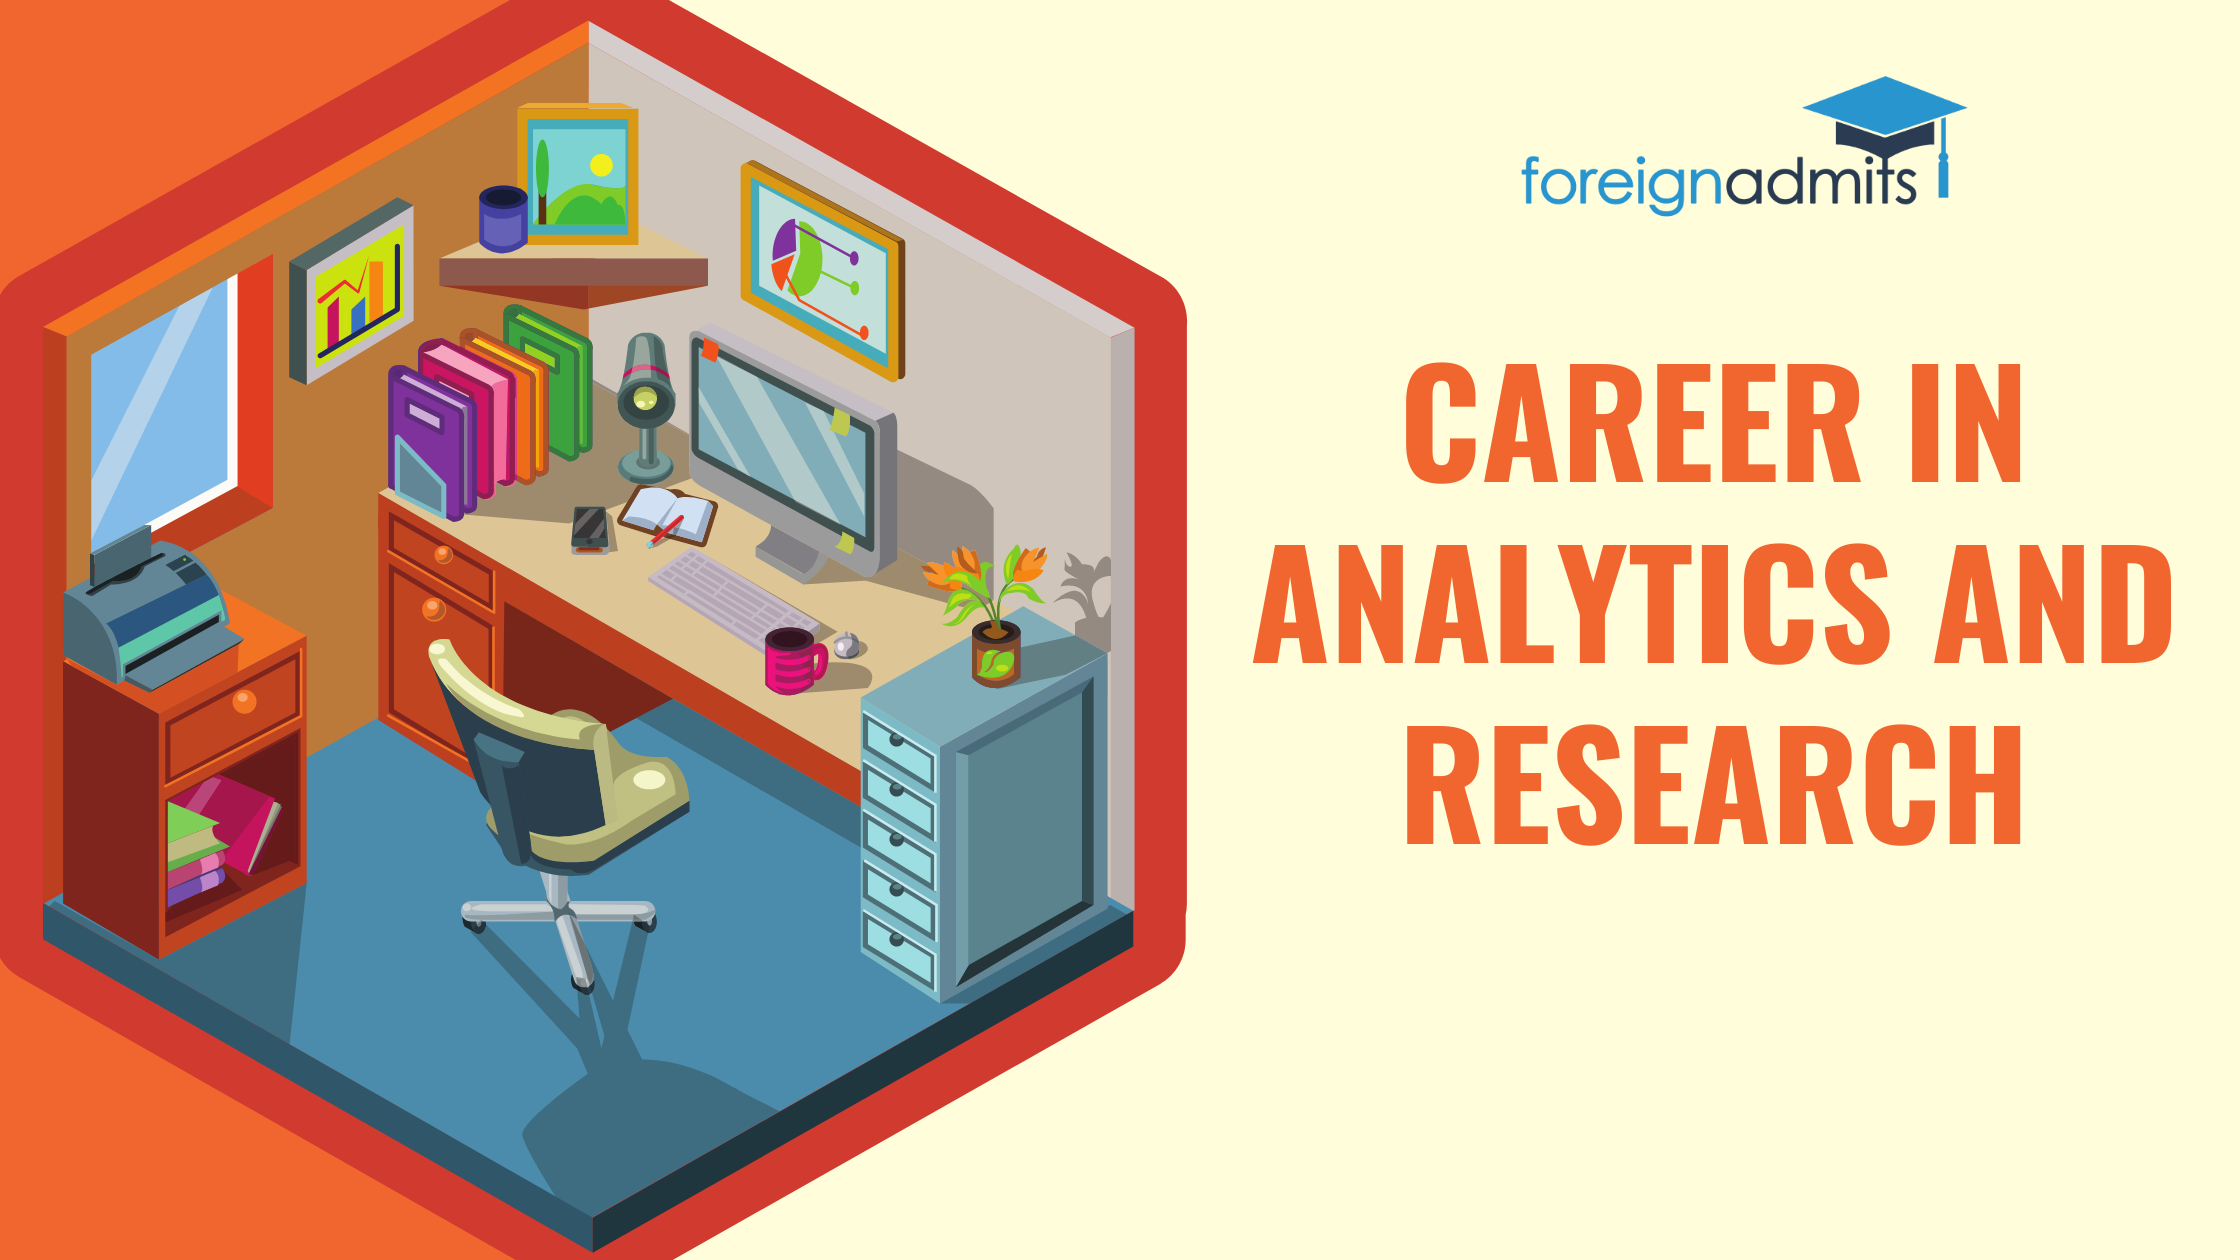 Is a career in analytics and research good for you?